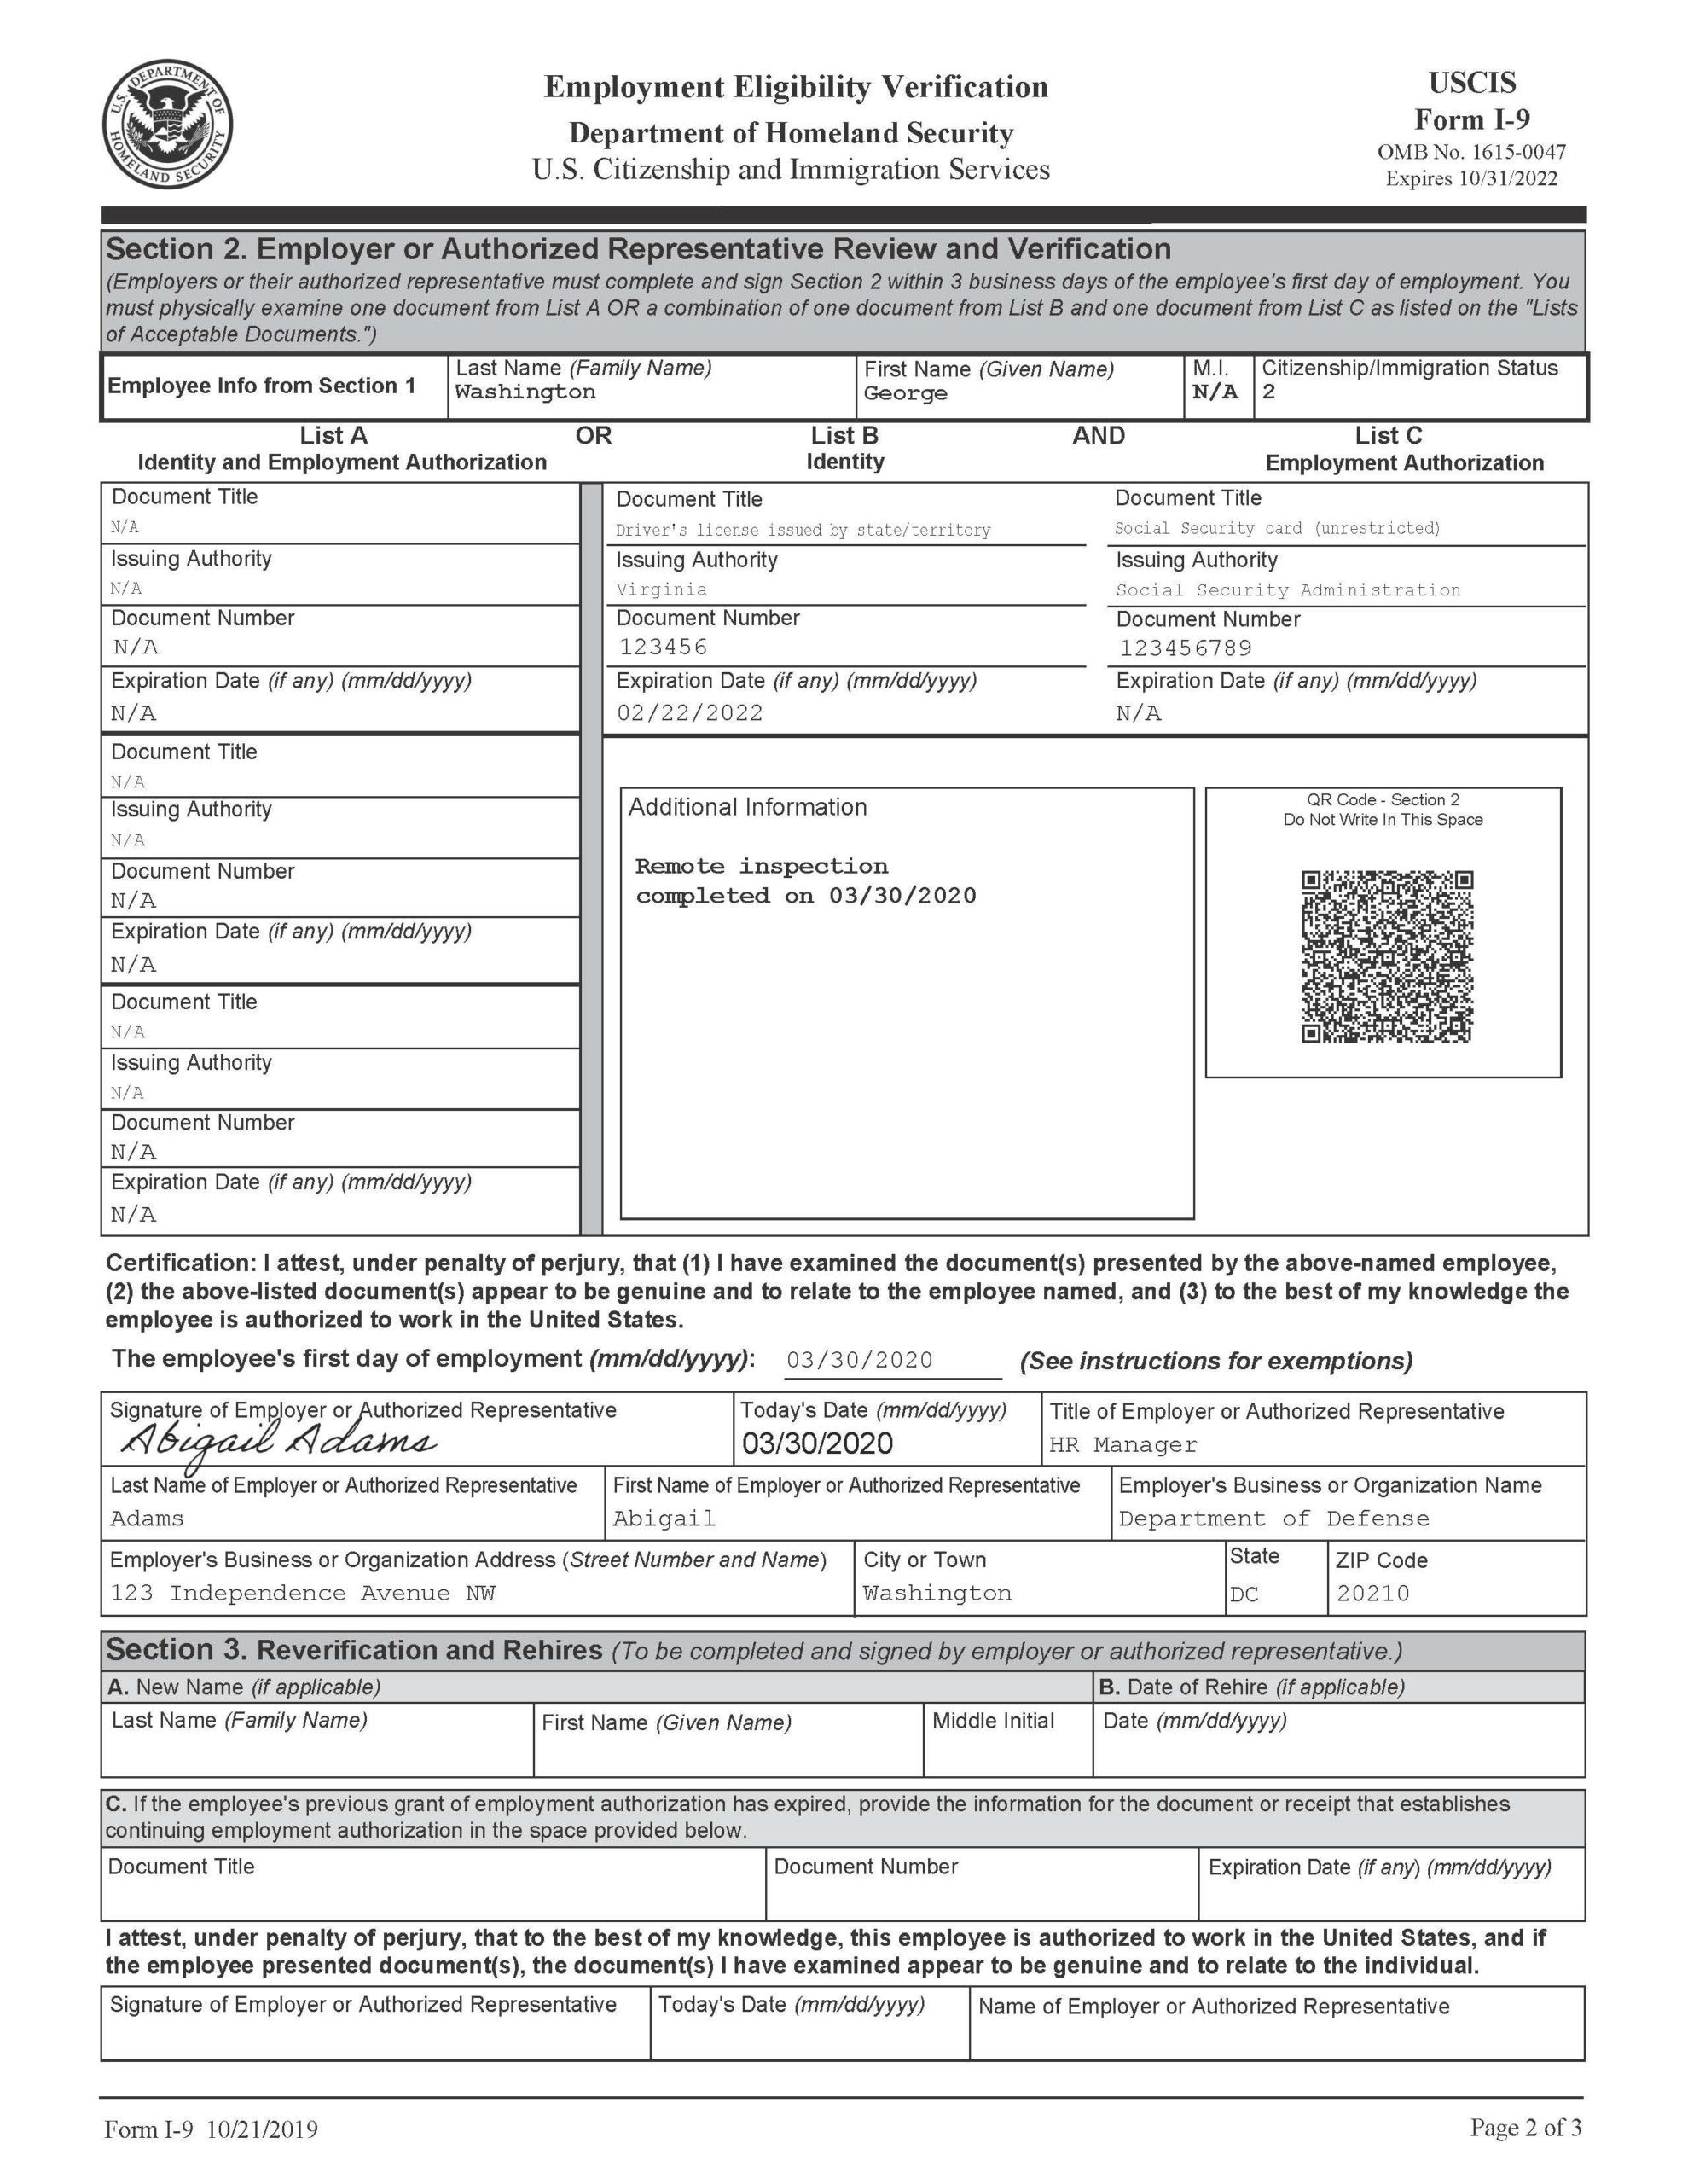 Form I-9 Examples Related To Temporary Covid-19 Policies-New I-9 Forms 2021 Printable